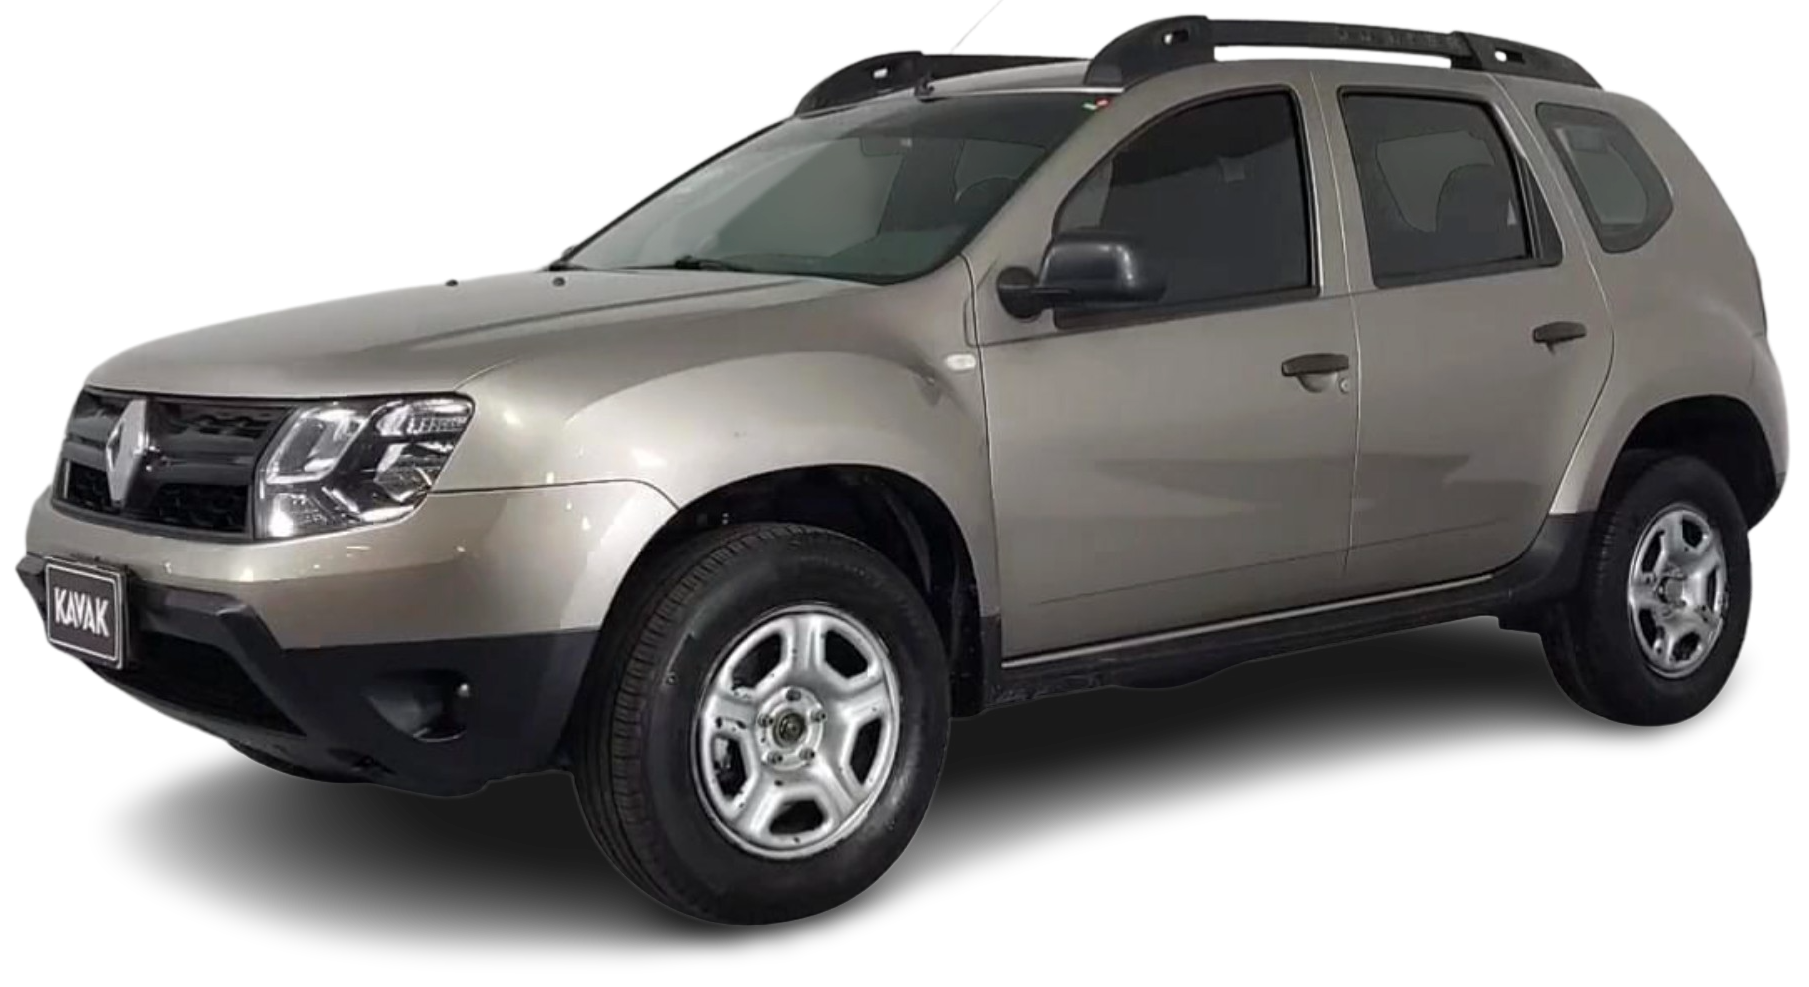 Renault Duster SUV 2021 2020 2019 2018 2017 2016